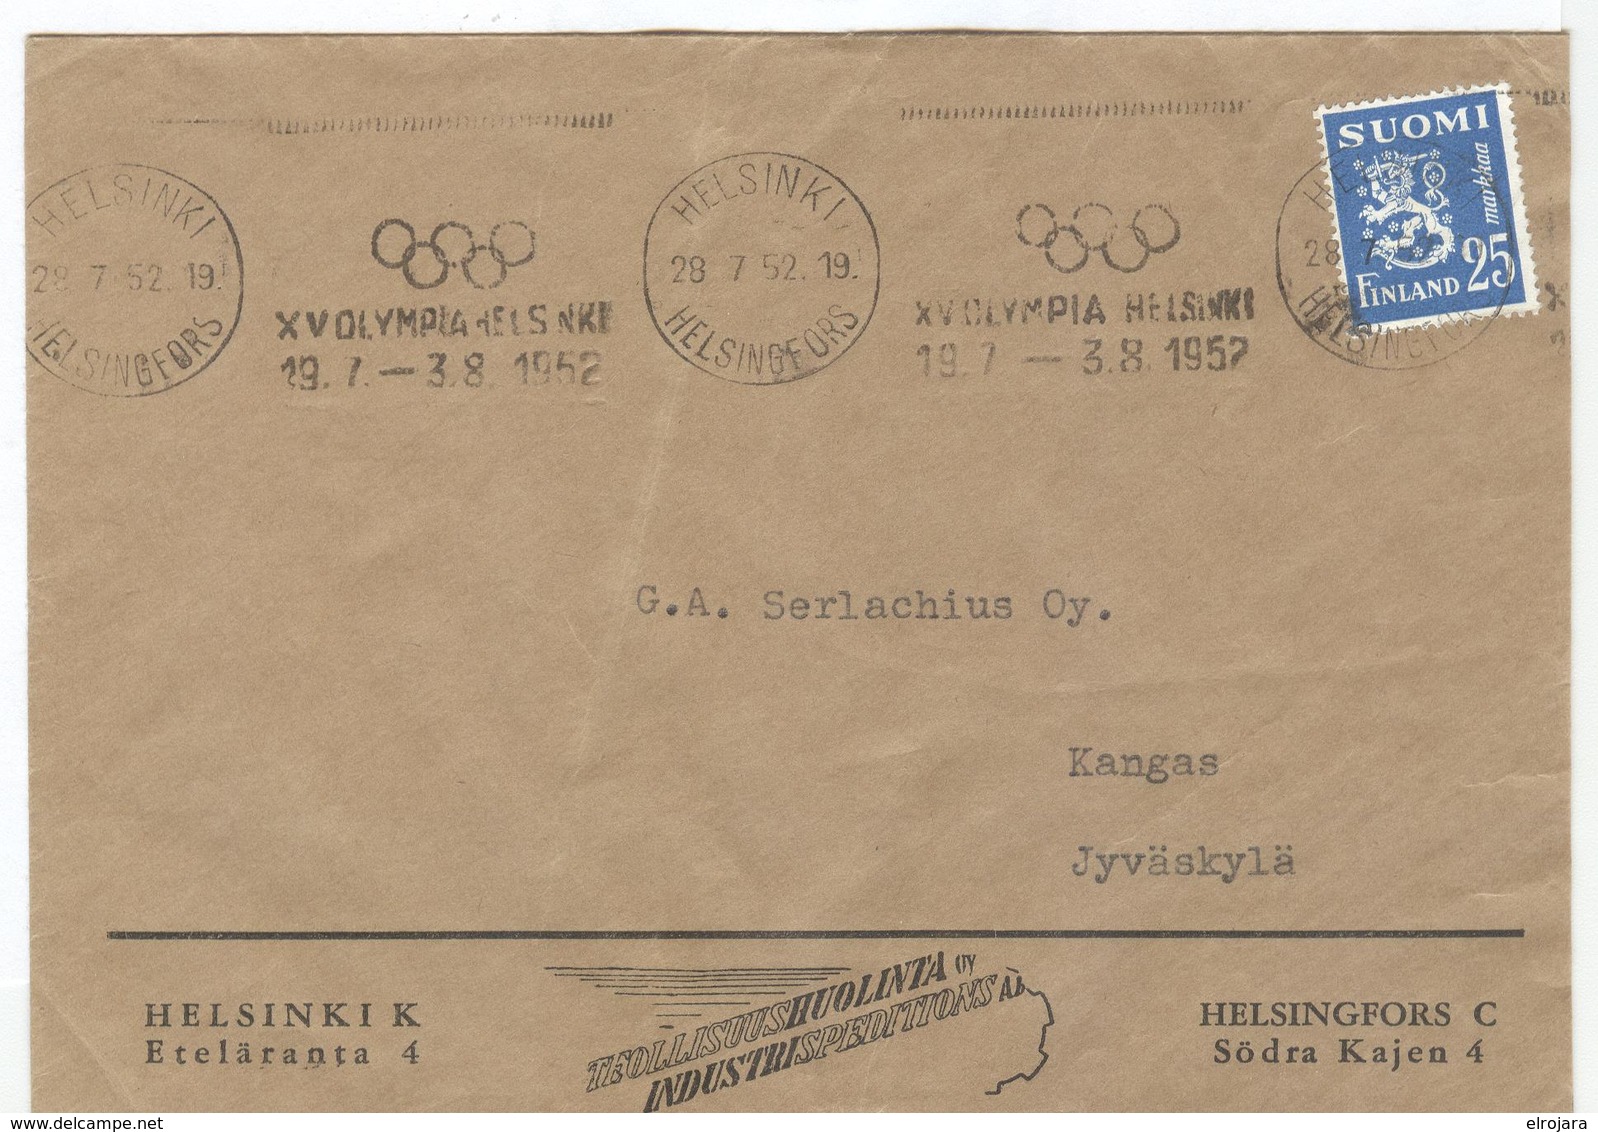 FINLAND Cover With Olympic Machine Cancel  28.7.52 During The Games - Sommer 1952: Helsinki